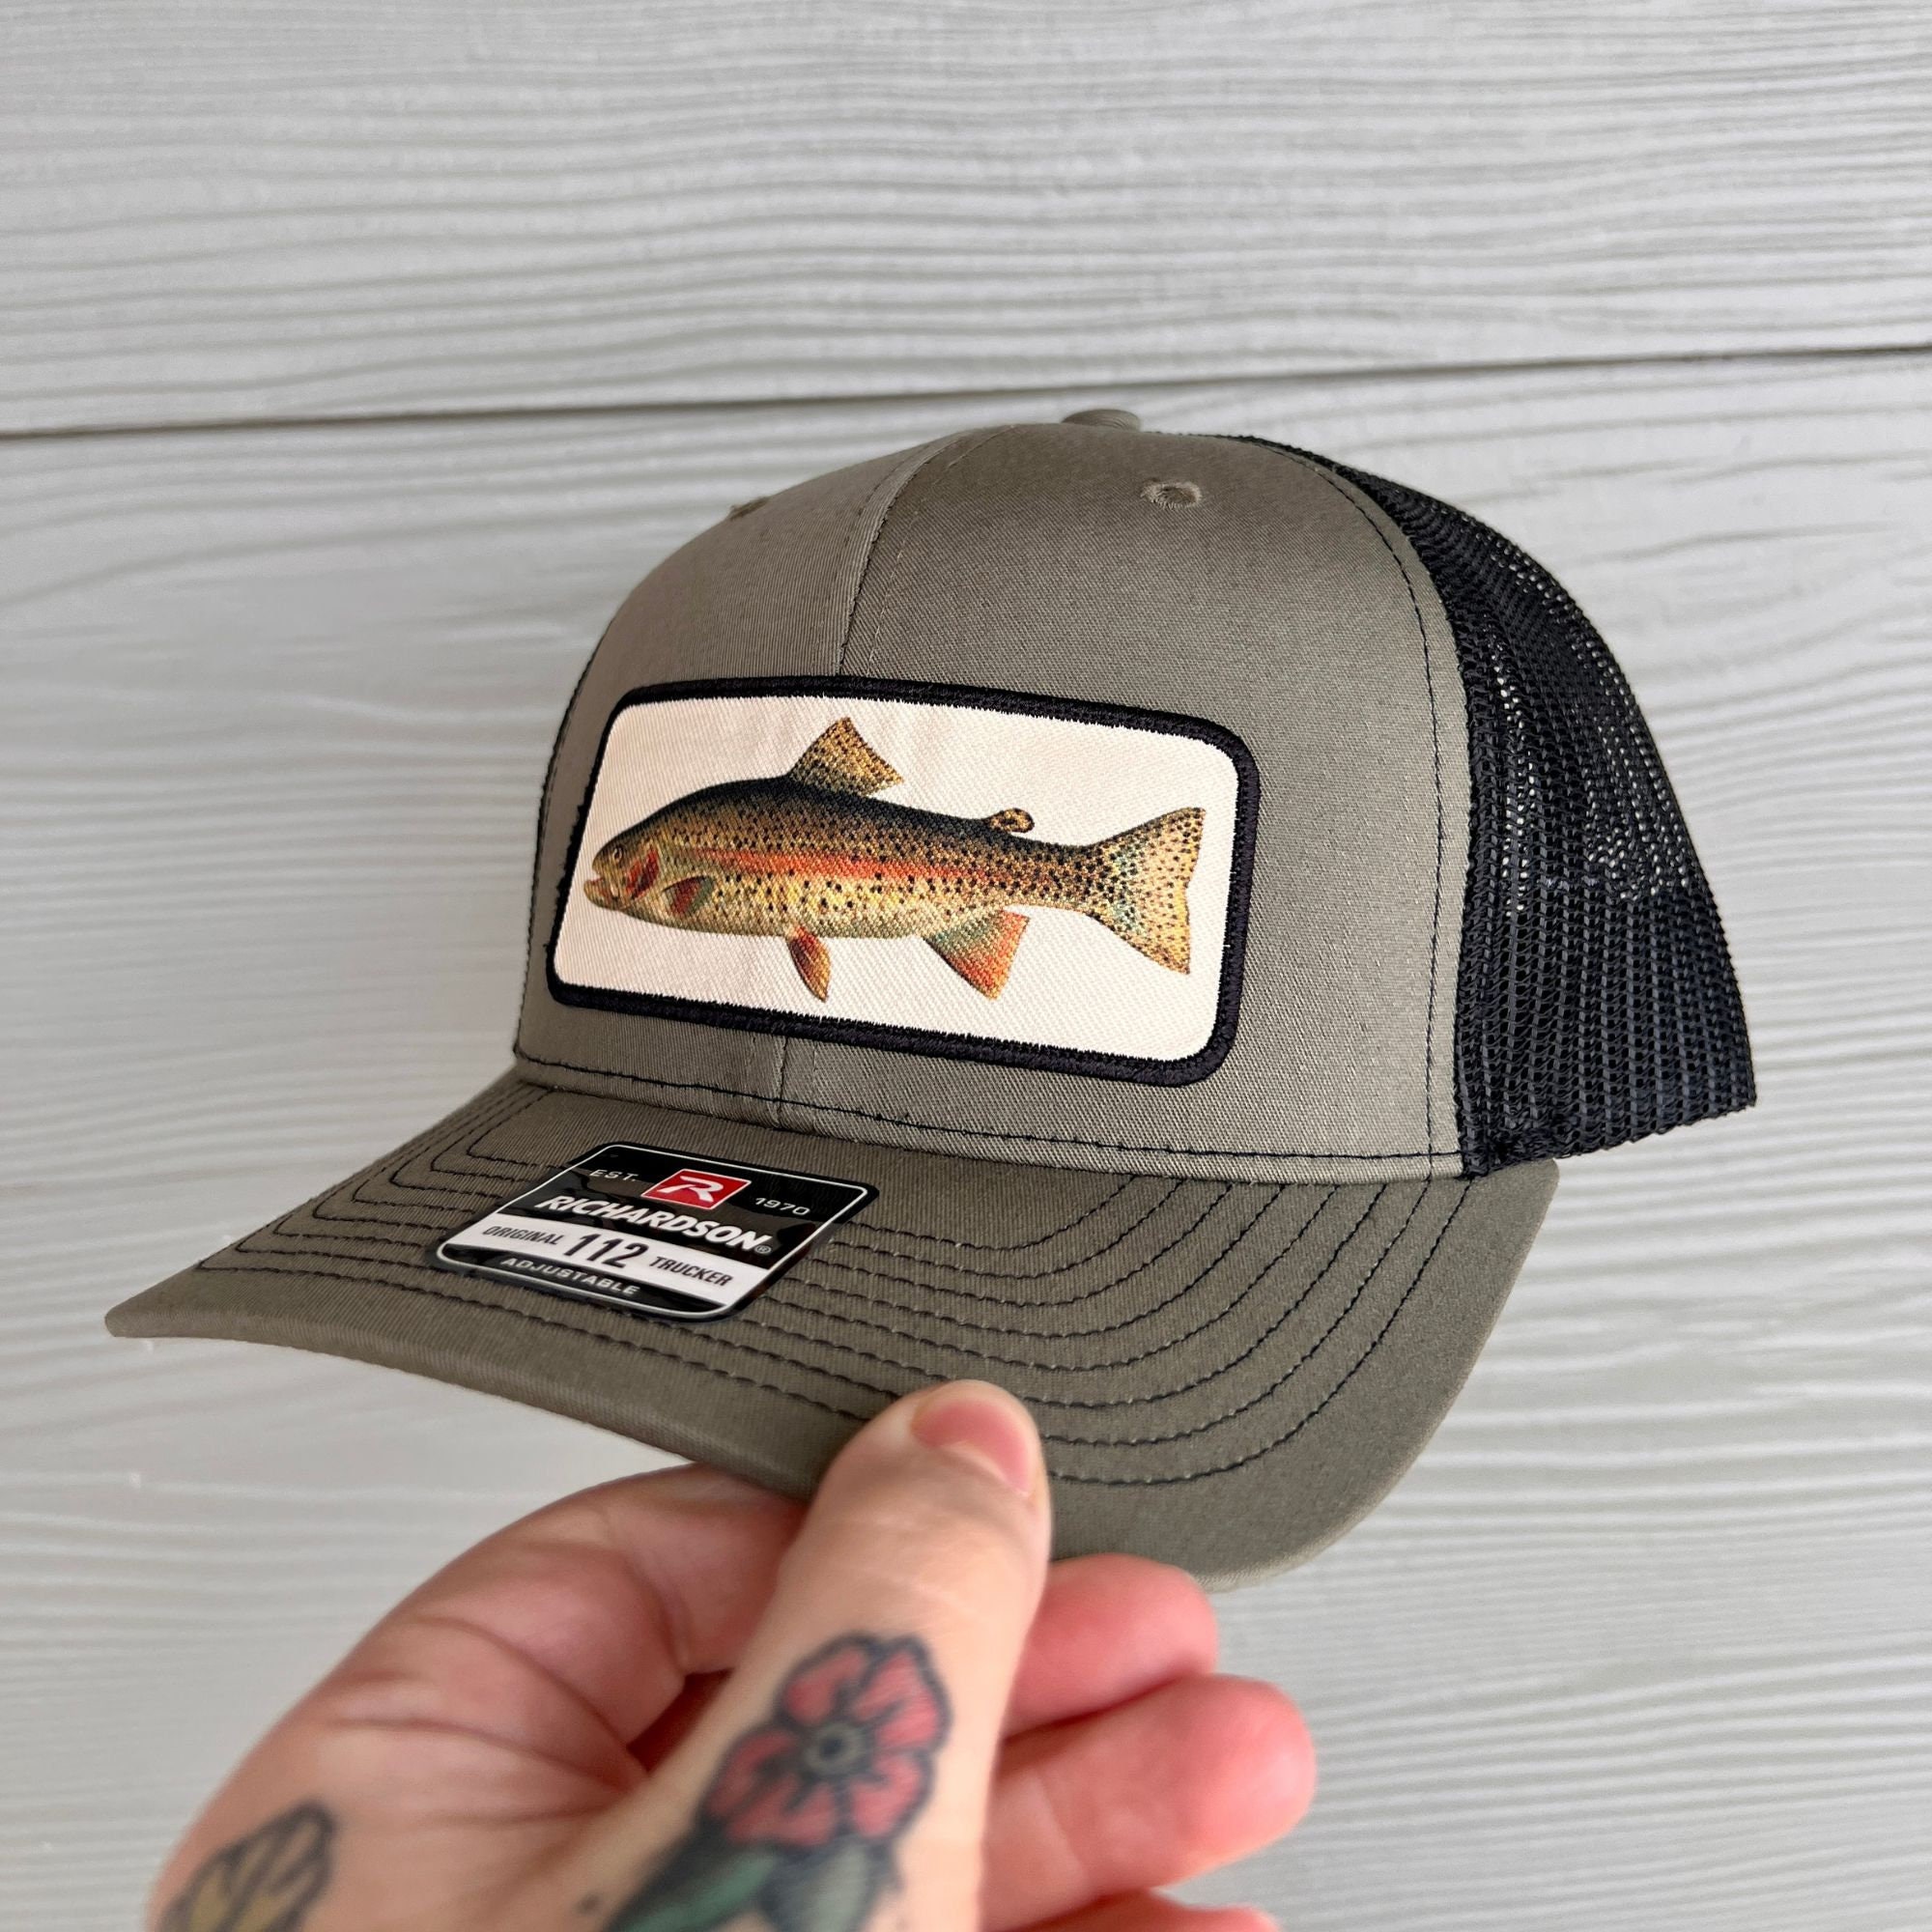 Fishing Hat, Flyfishing, Gift for Fisherman, Fishing Gifts, Hats for Men,  Gifts for Husband, Angler Fishing, Trout Fishing Hat, Snapback -  Sweden